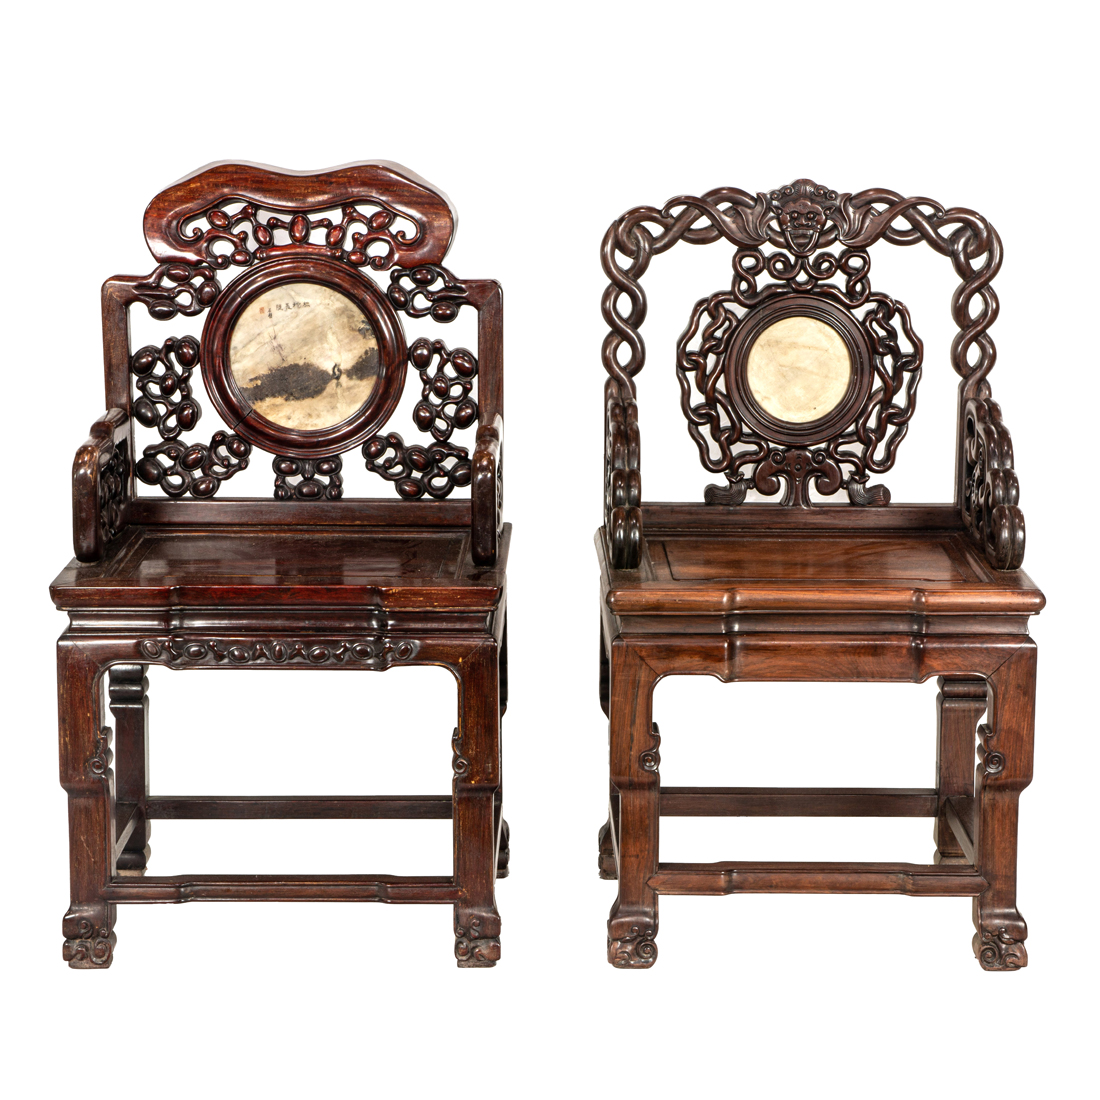  LOT OF 2 CHINESE CARVED HARDWOOD 2d2bec